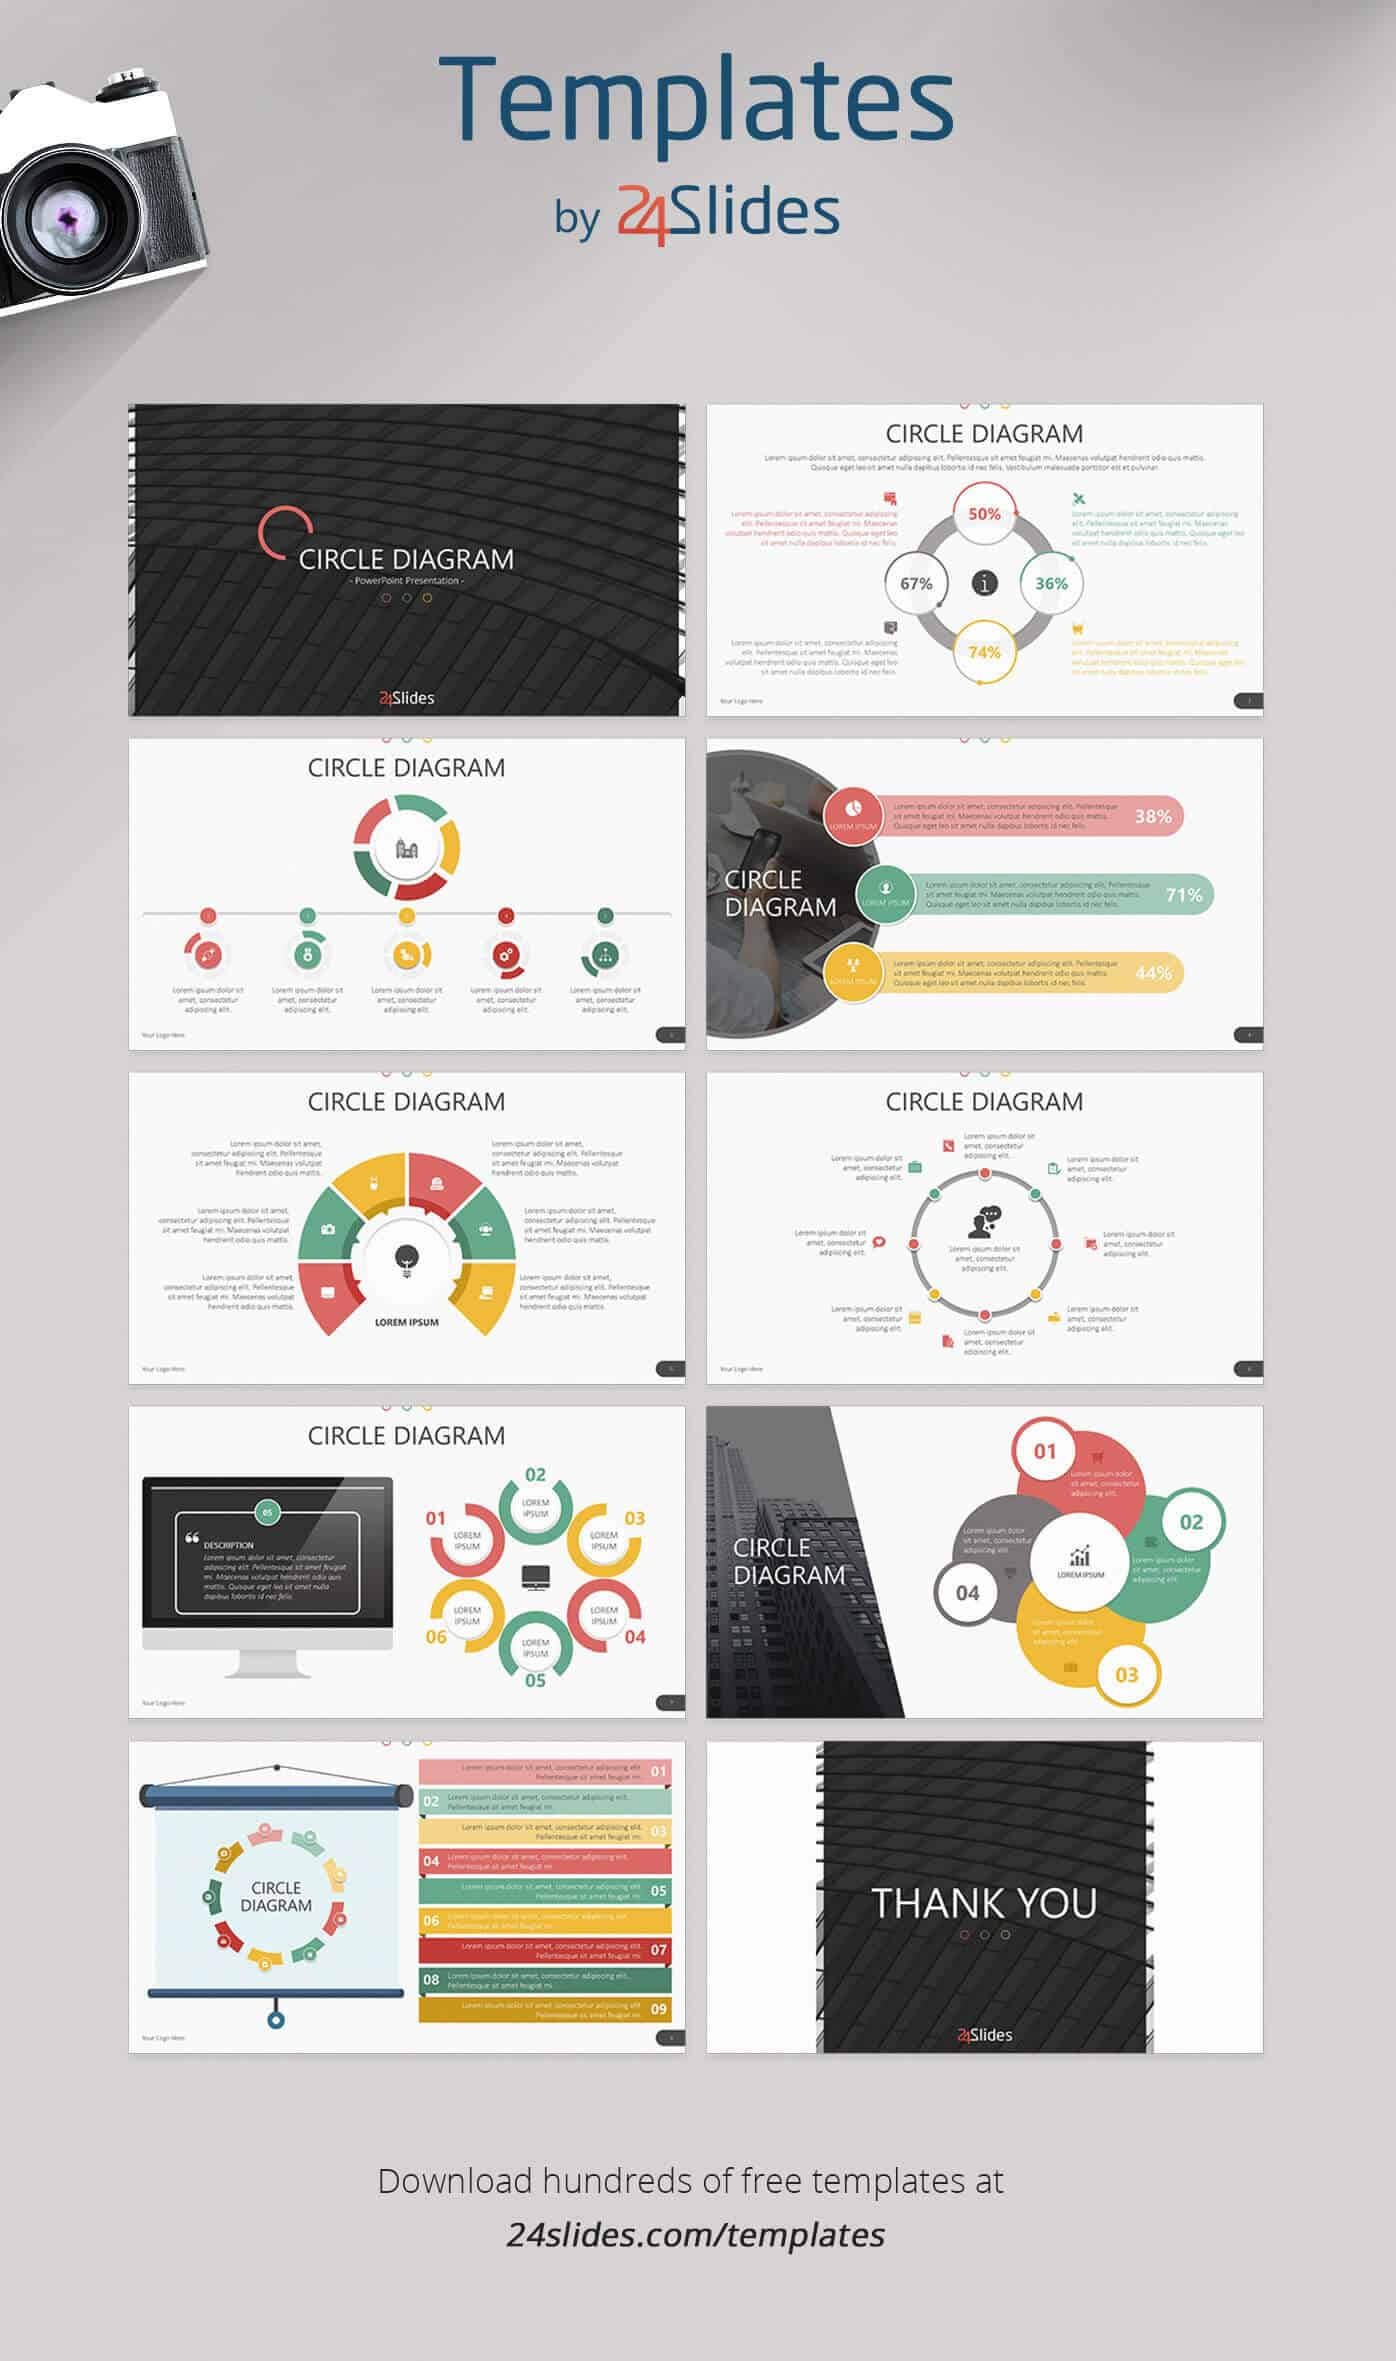 15 Fun And Colorful Free Powerpoint Templates | Present Better In Fun Powerpoint Templates Free Download